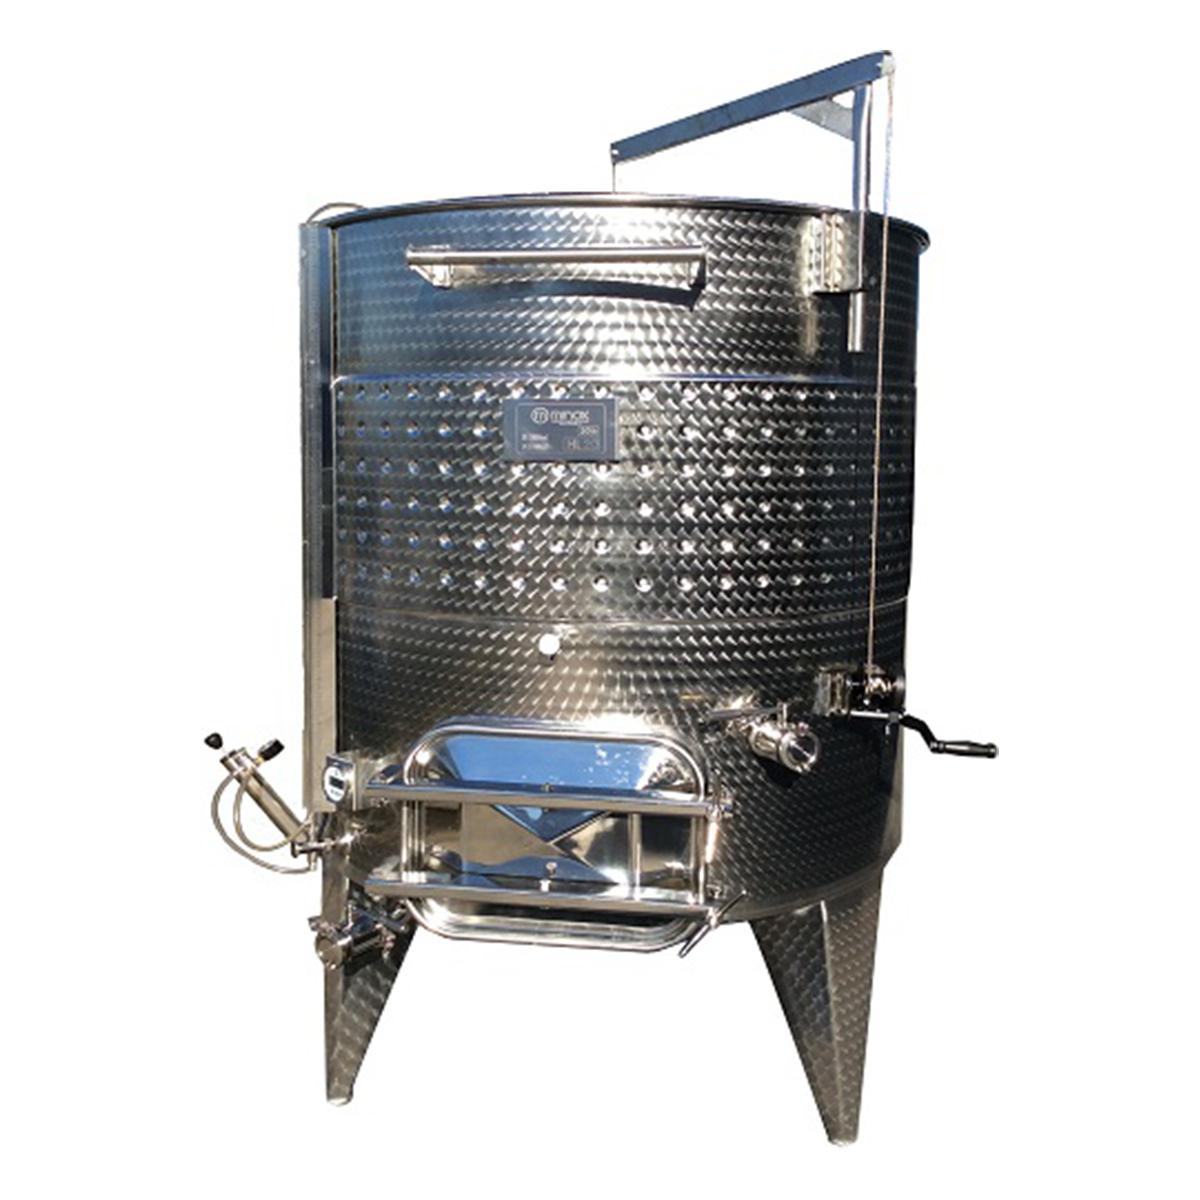 Variable Capacity Conical Bottom Tank